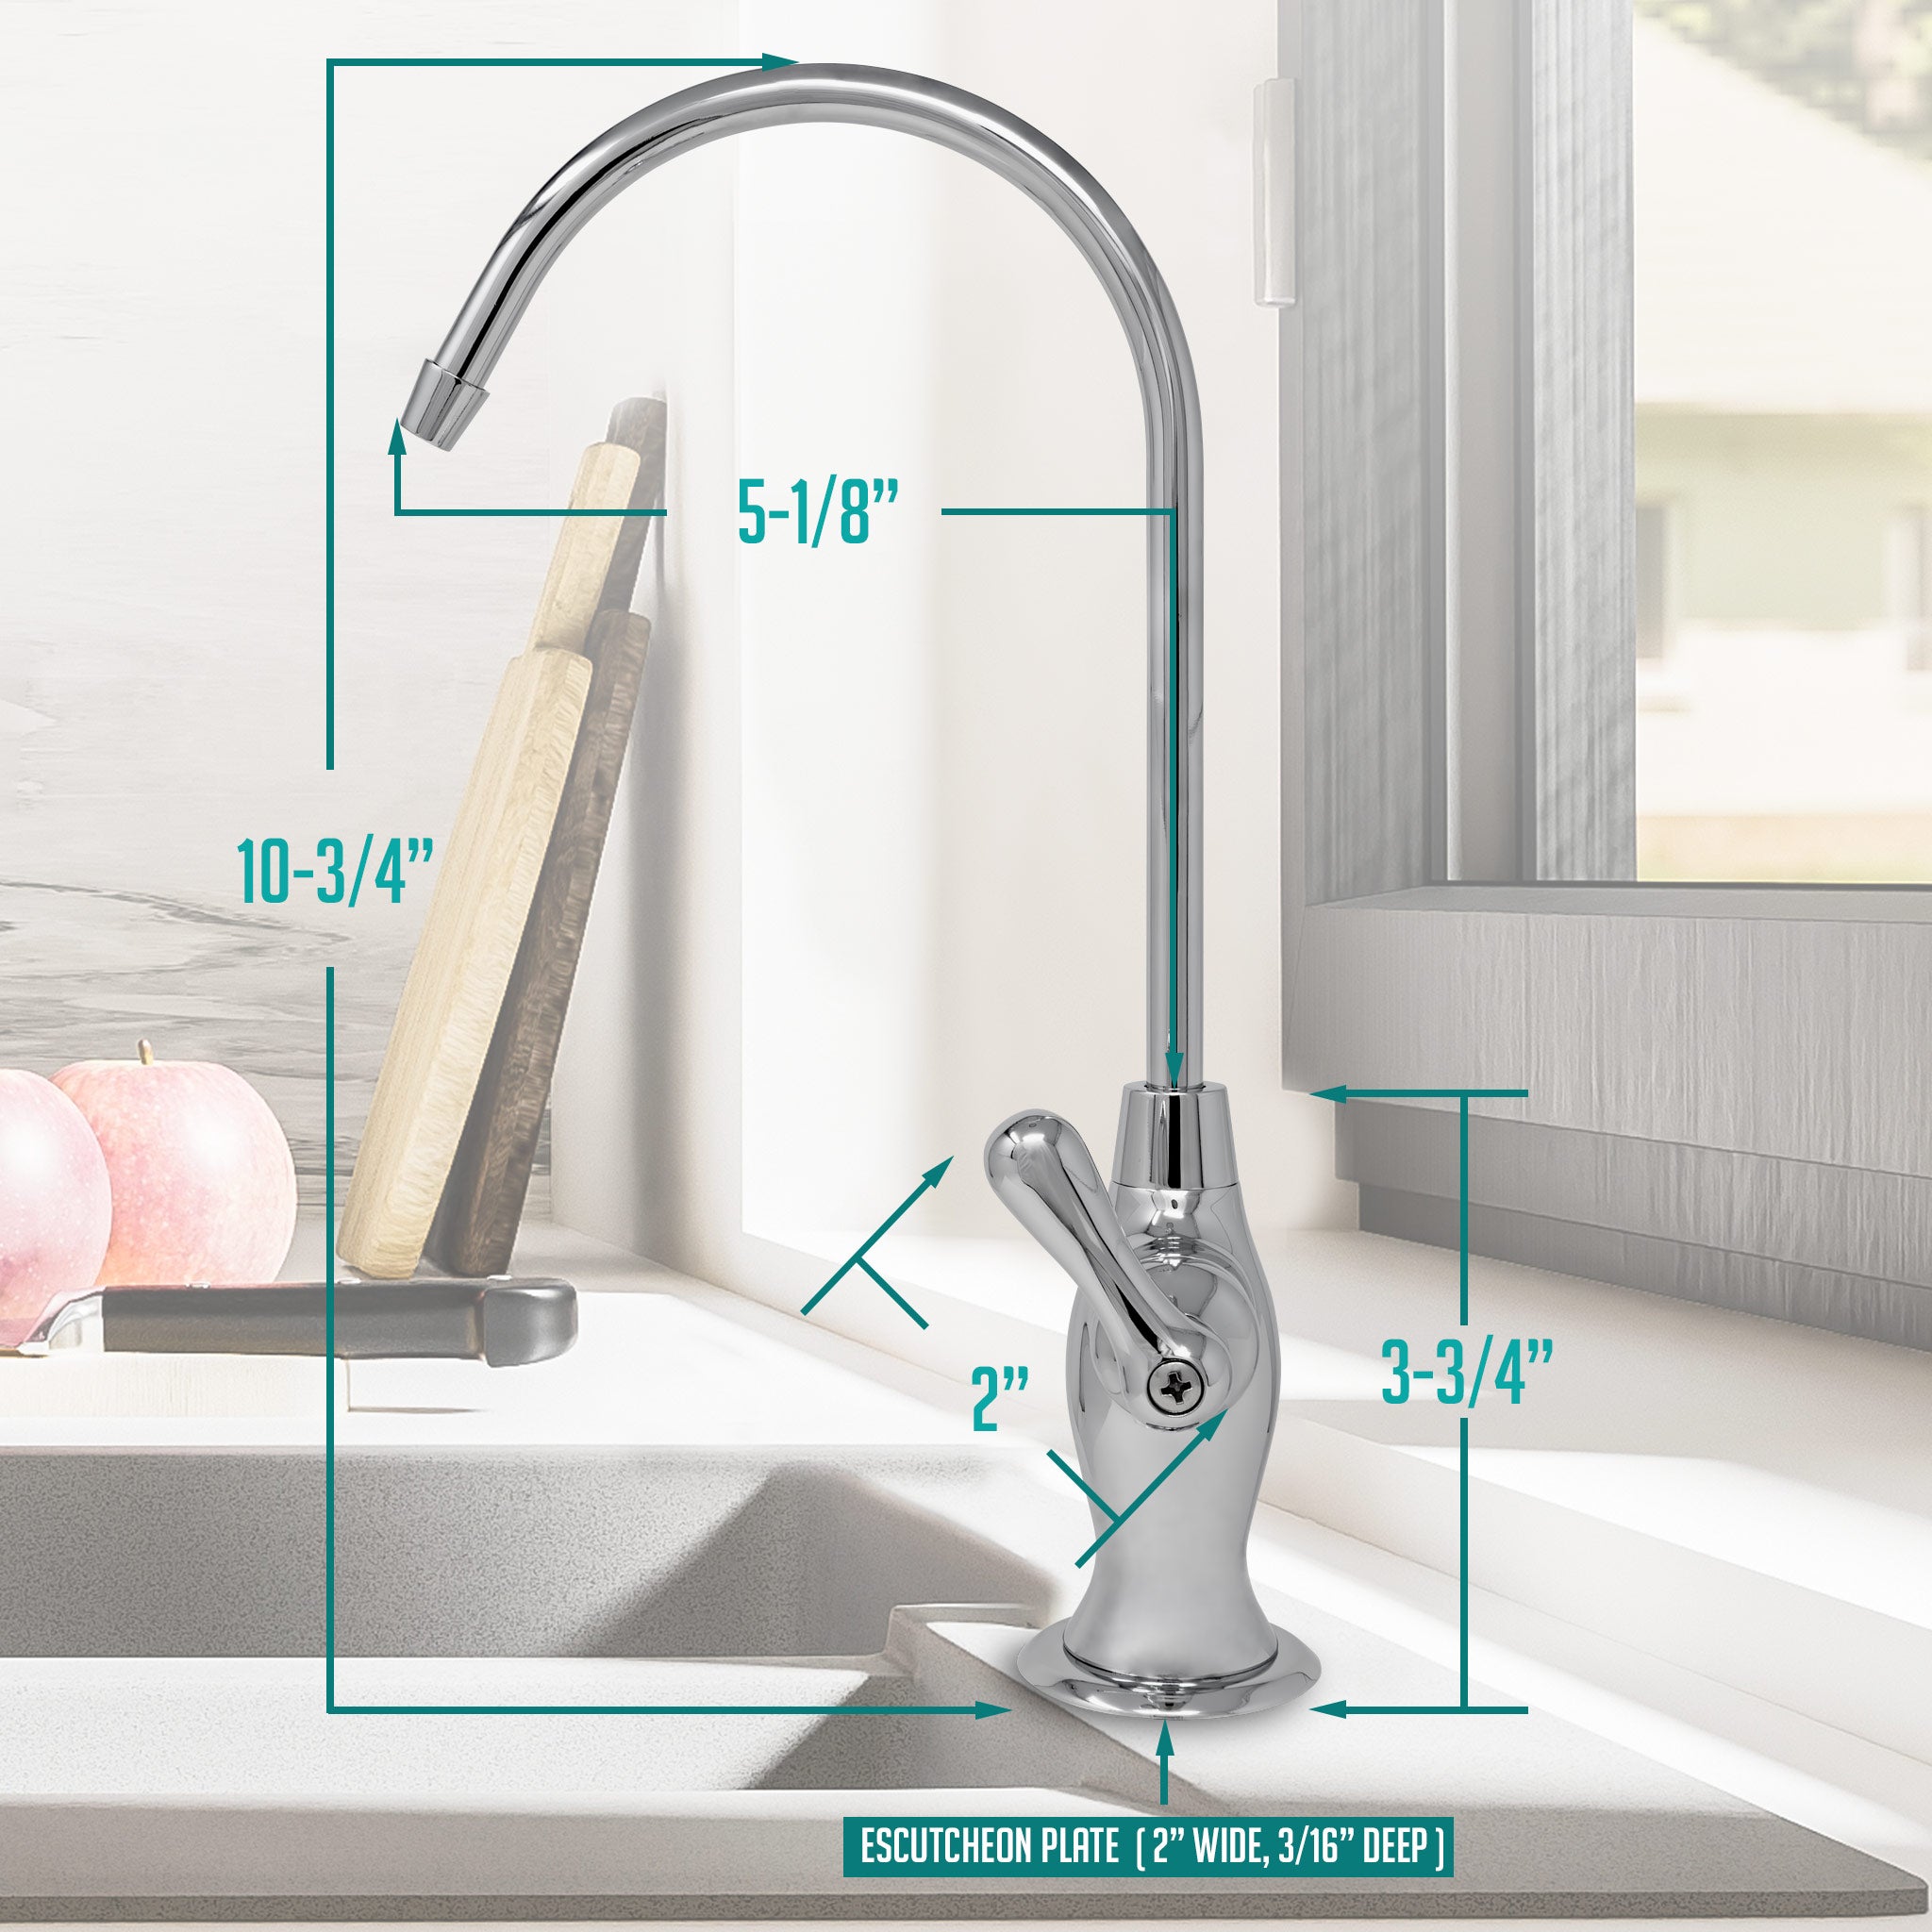 Water Filtration Faucet Vase Style Chrome Reverse Osmosis Air Gap with Pre-installed Tubing. Certified by NSF.